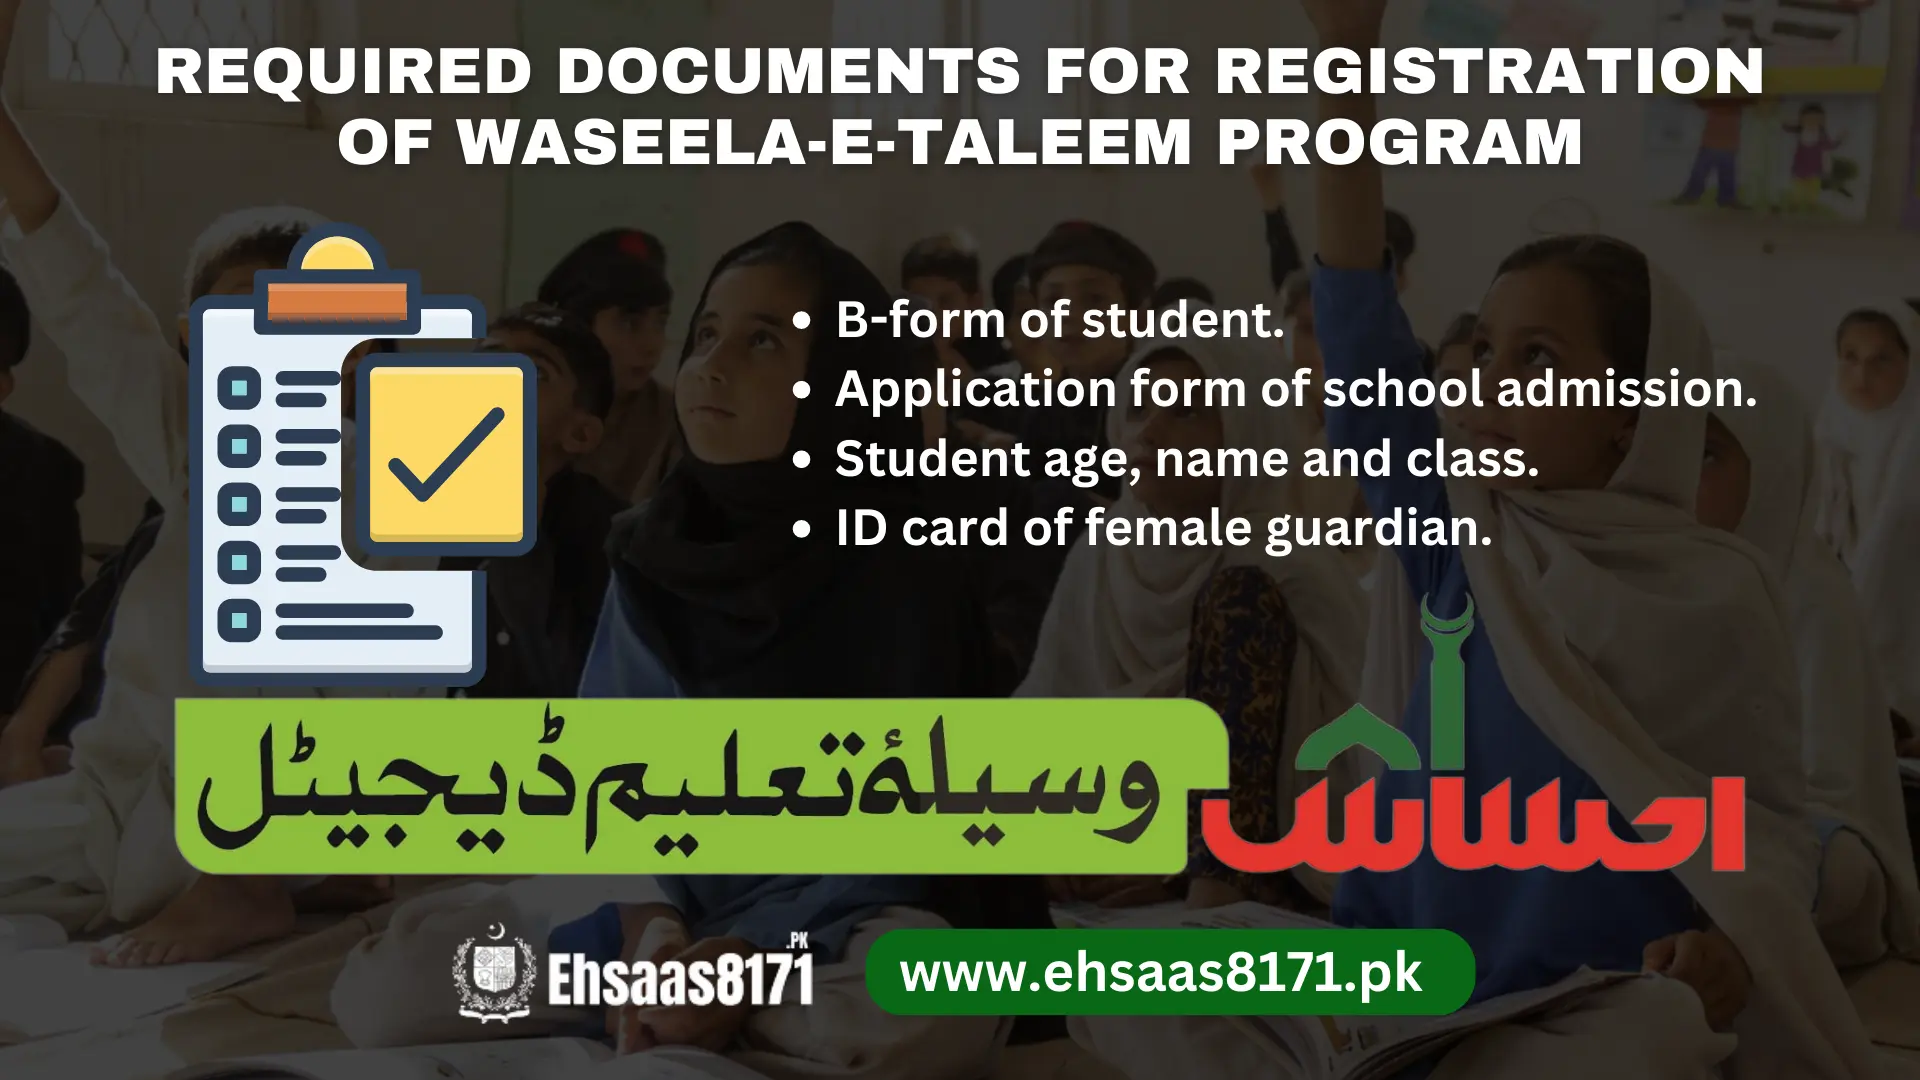 Required documents for registration of Waseela-e-Taleem program